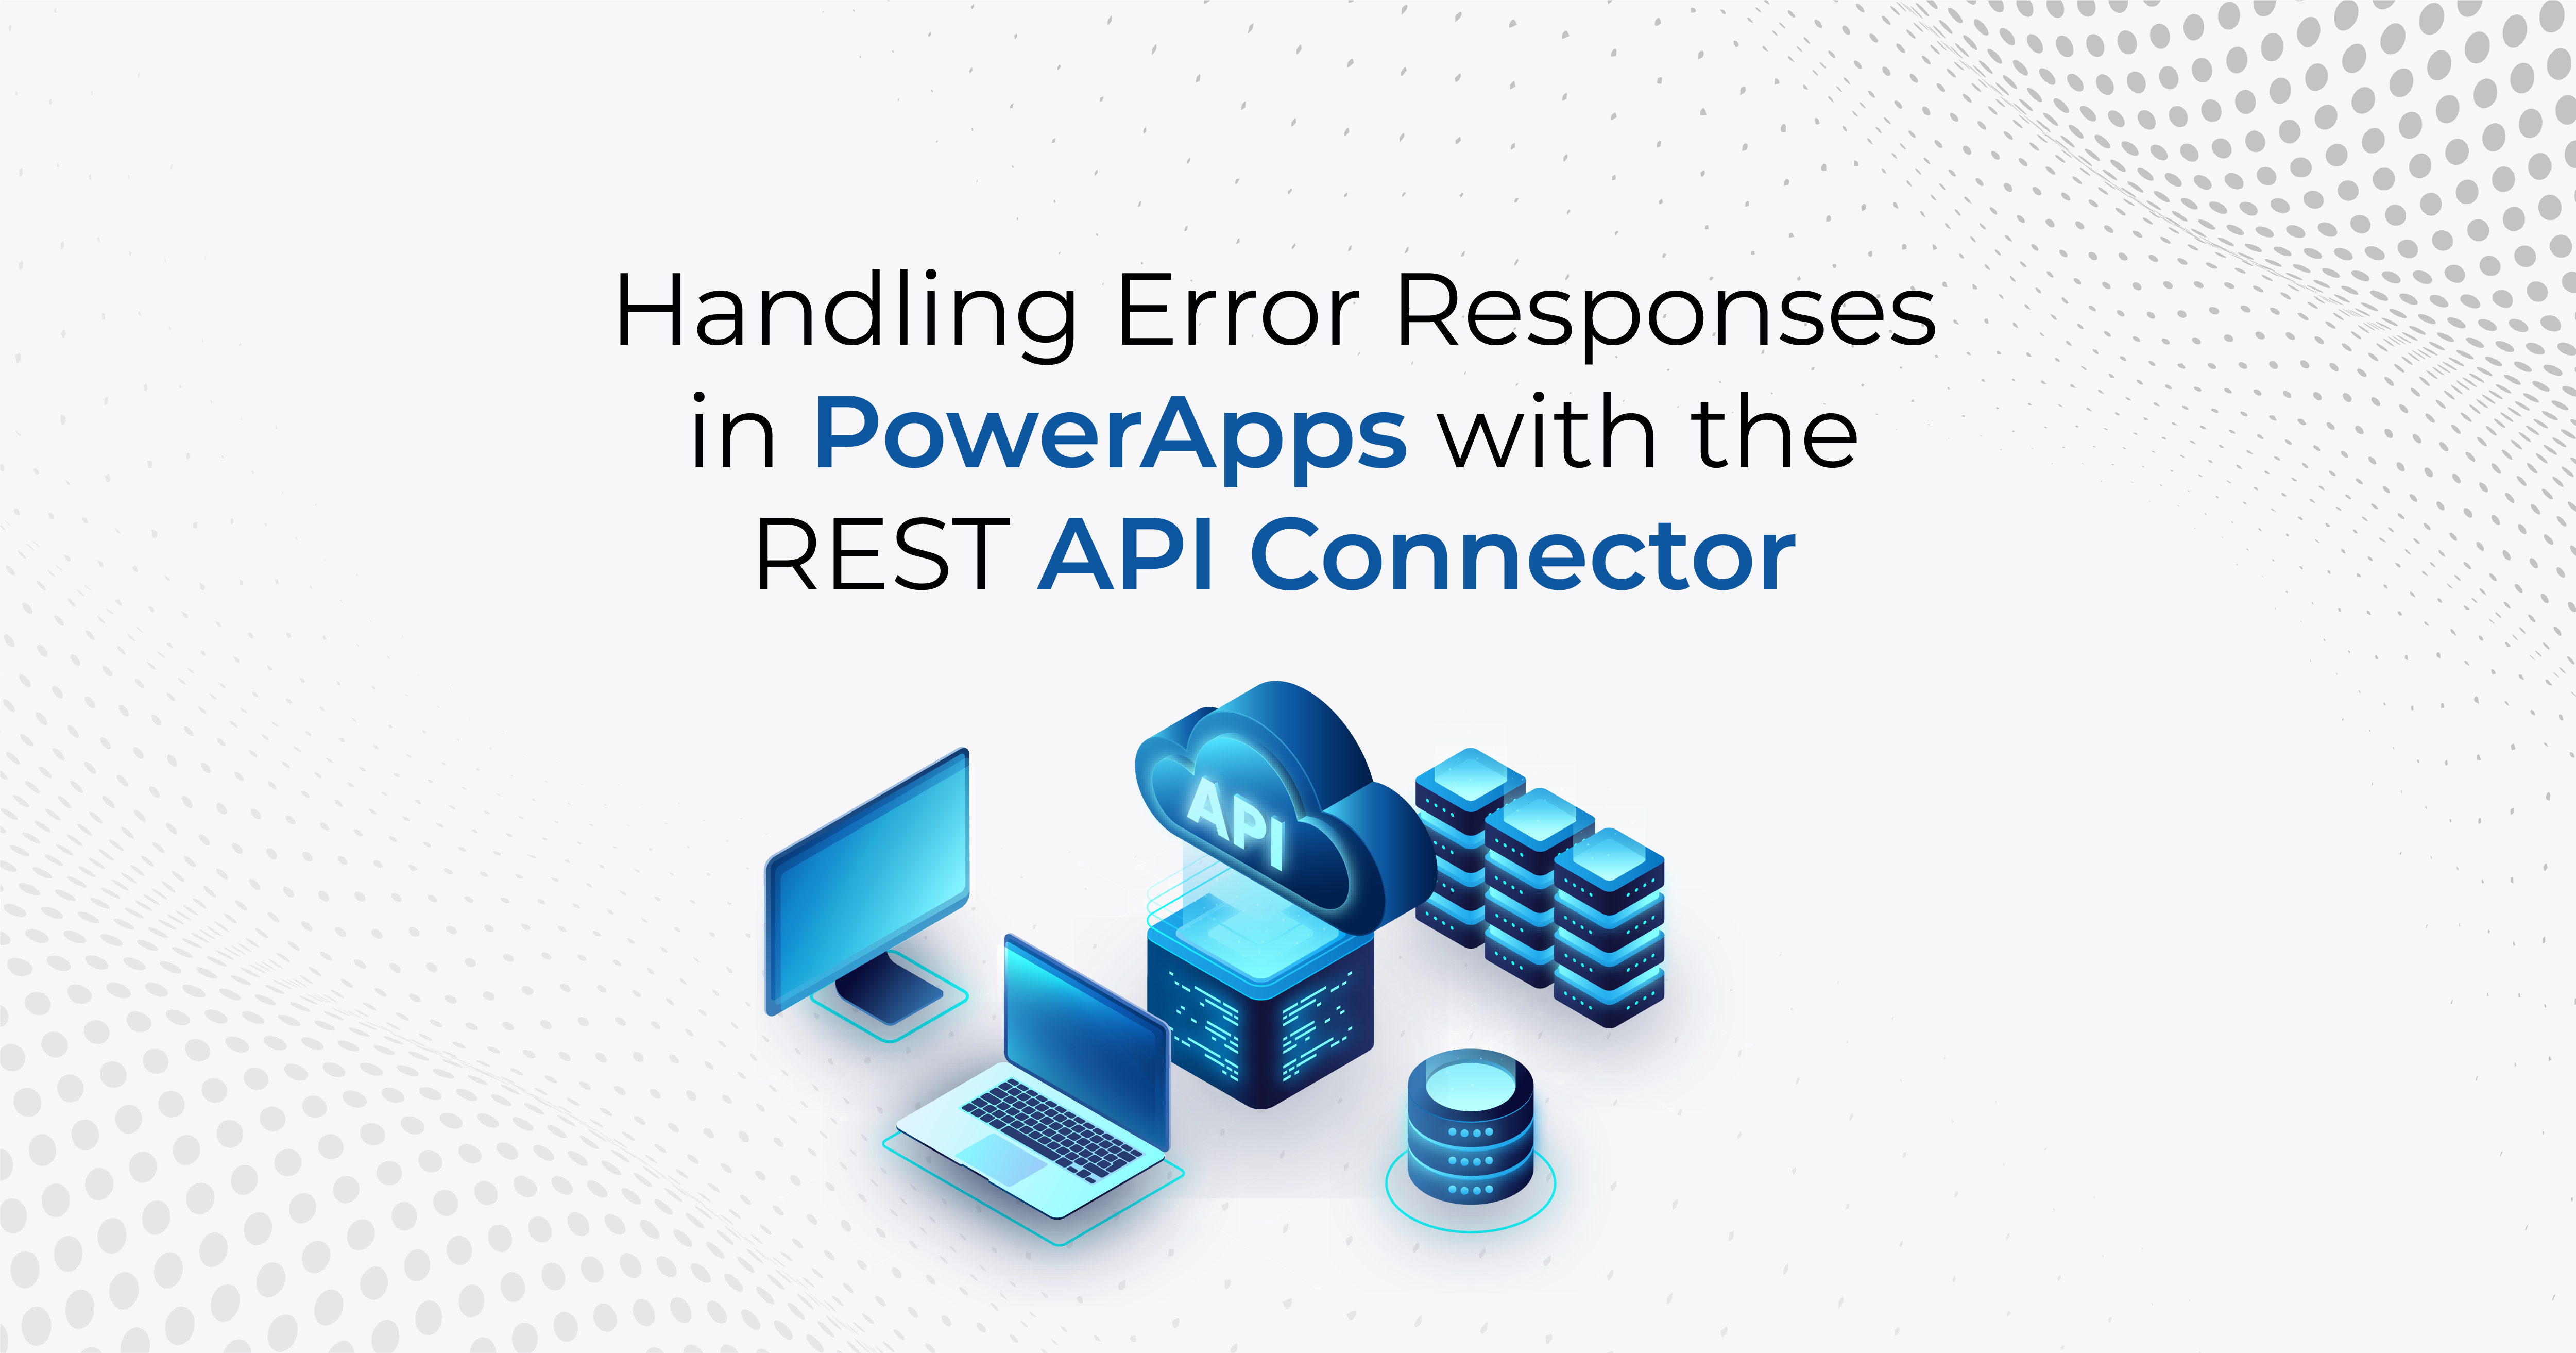 PowerApps with the REST API Connector